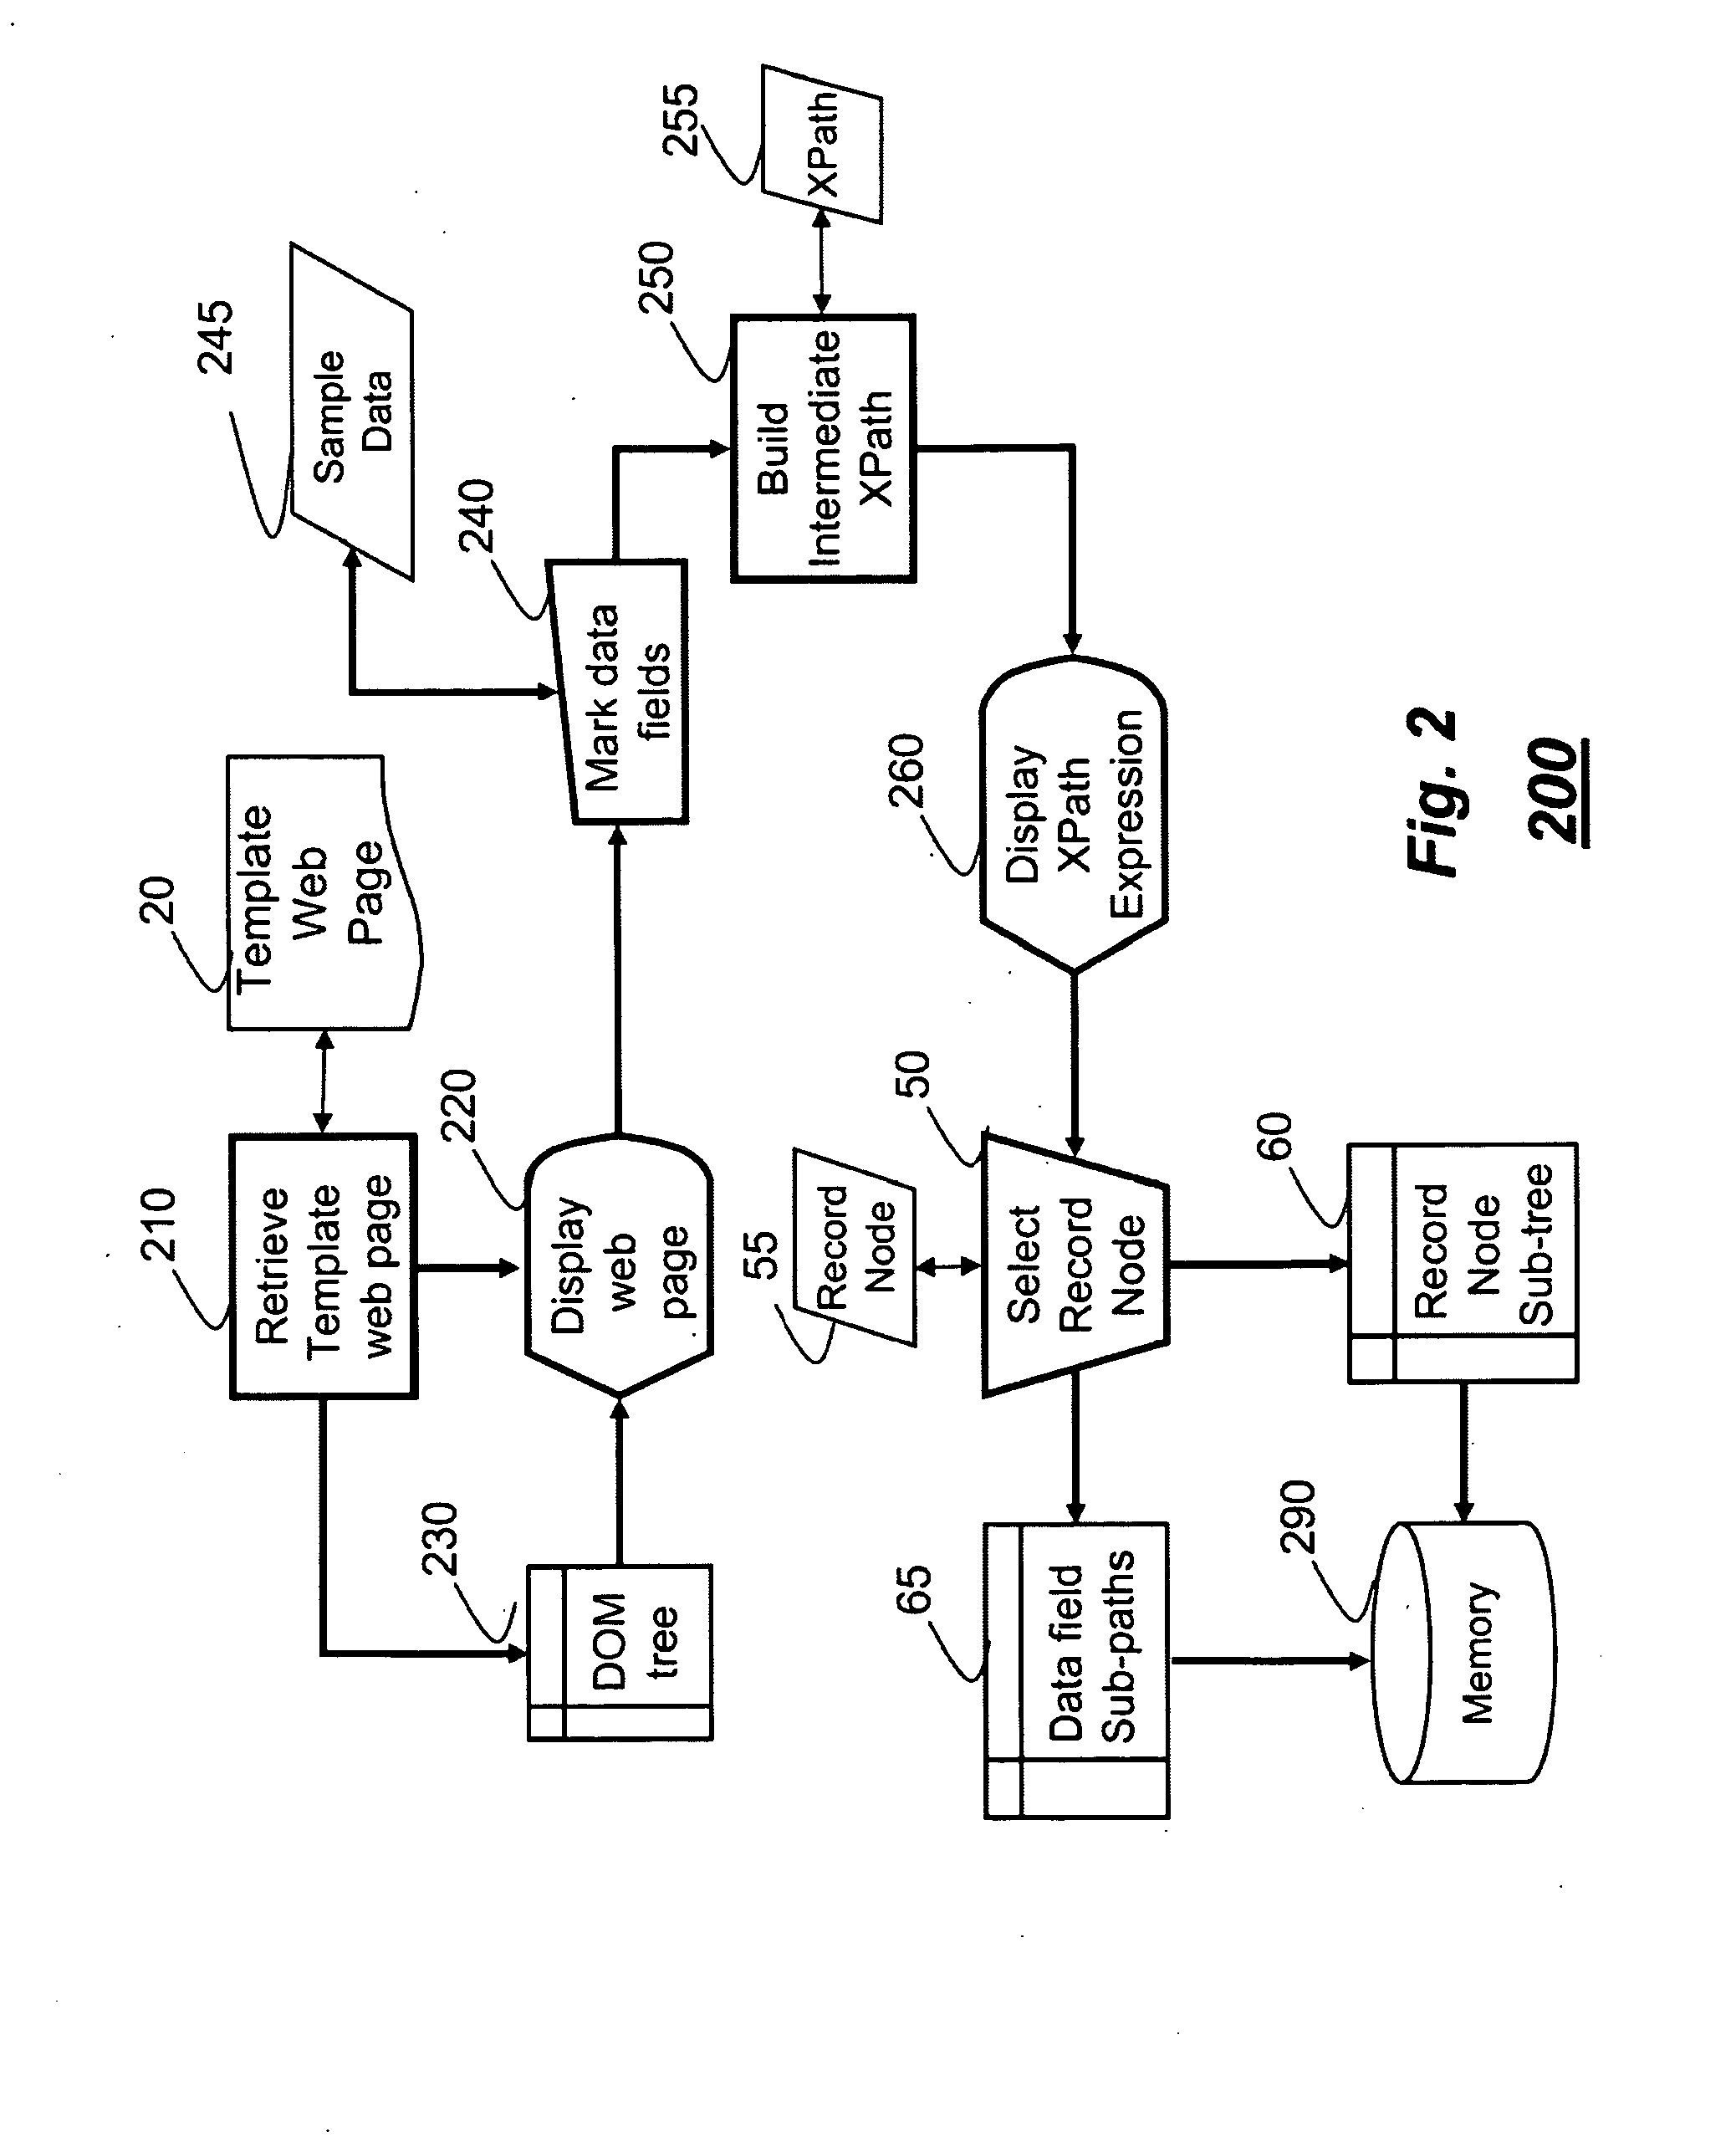 Method for Extracting Data from Web Pages